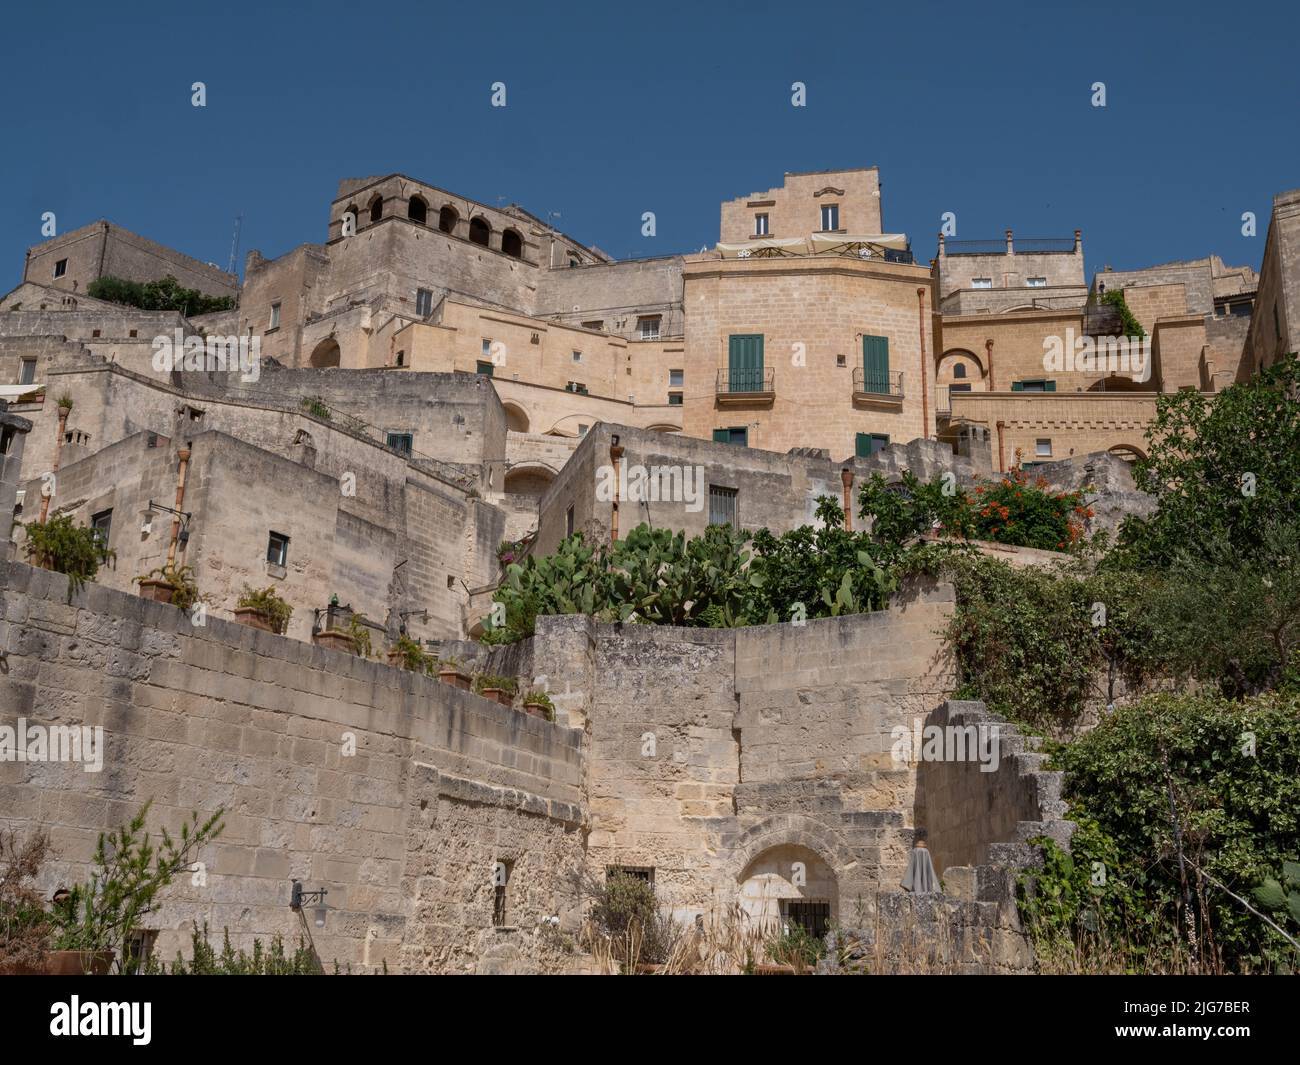 Panoramic view of the Sassi di Matera, the ancient cave dwellings and old city of Matera, Italy that dates from the Paleolithic period Stock Photo